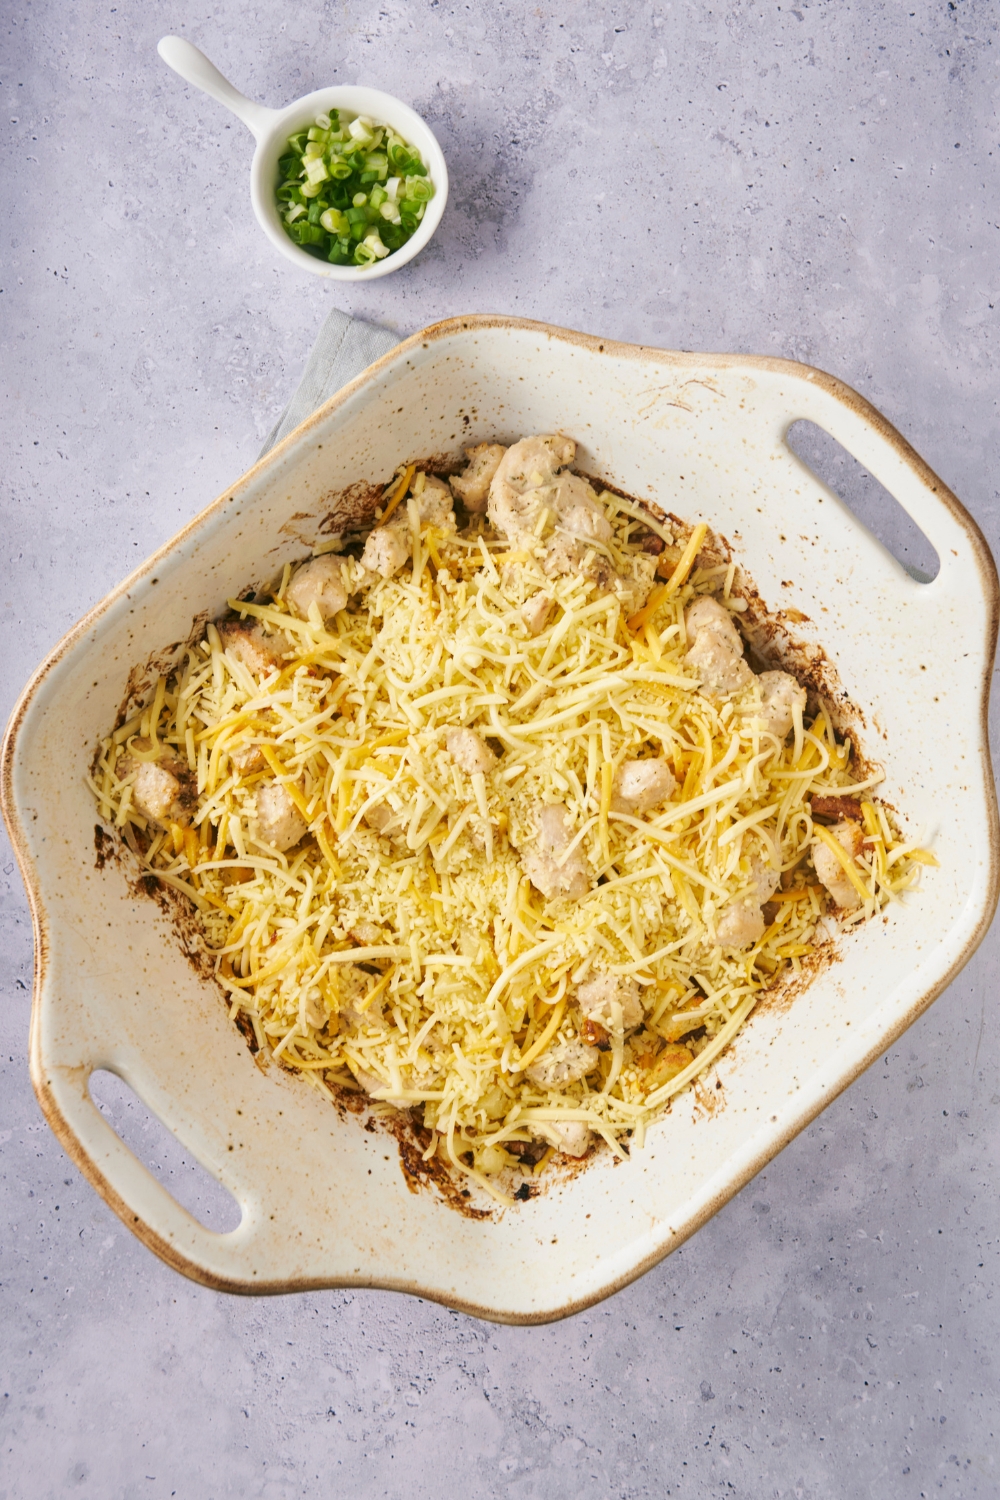 A casserole dish with potatoes, chicken and shredded cheese on top.